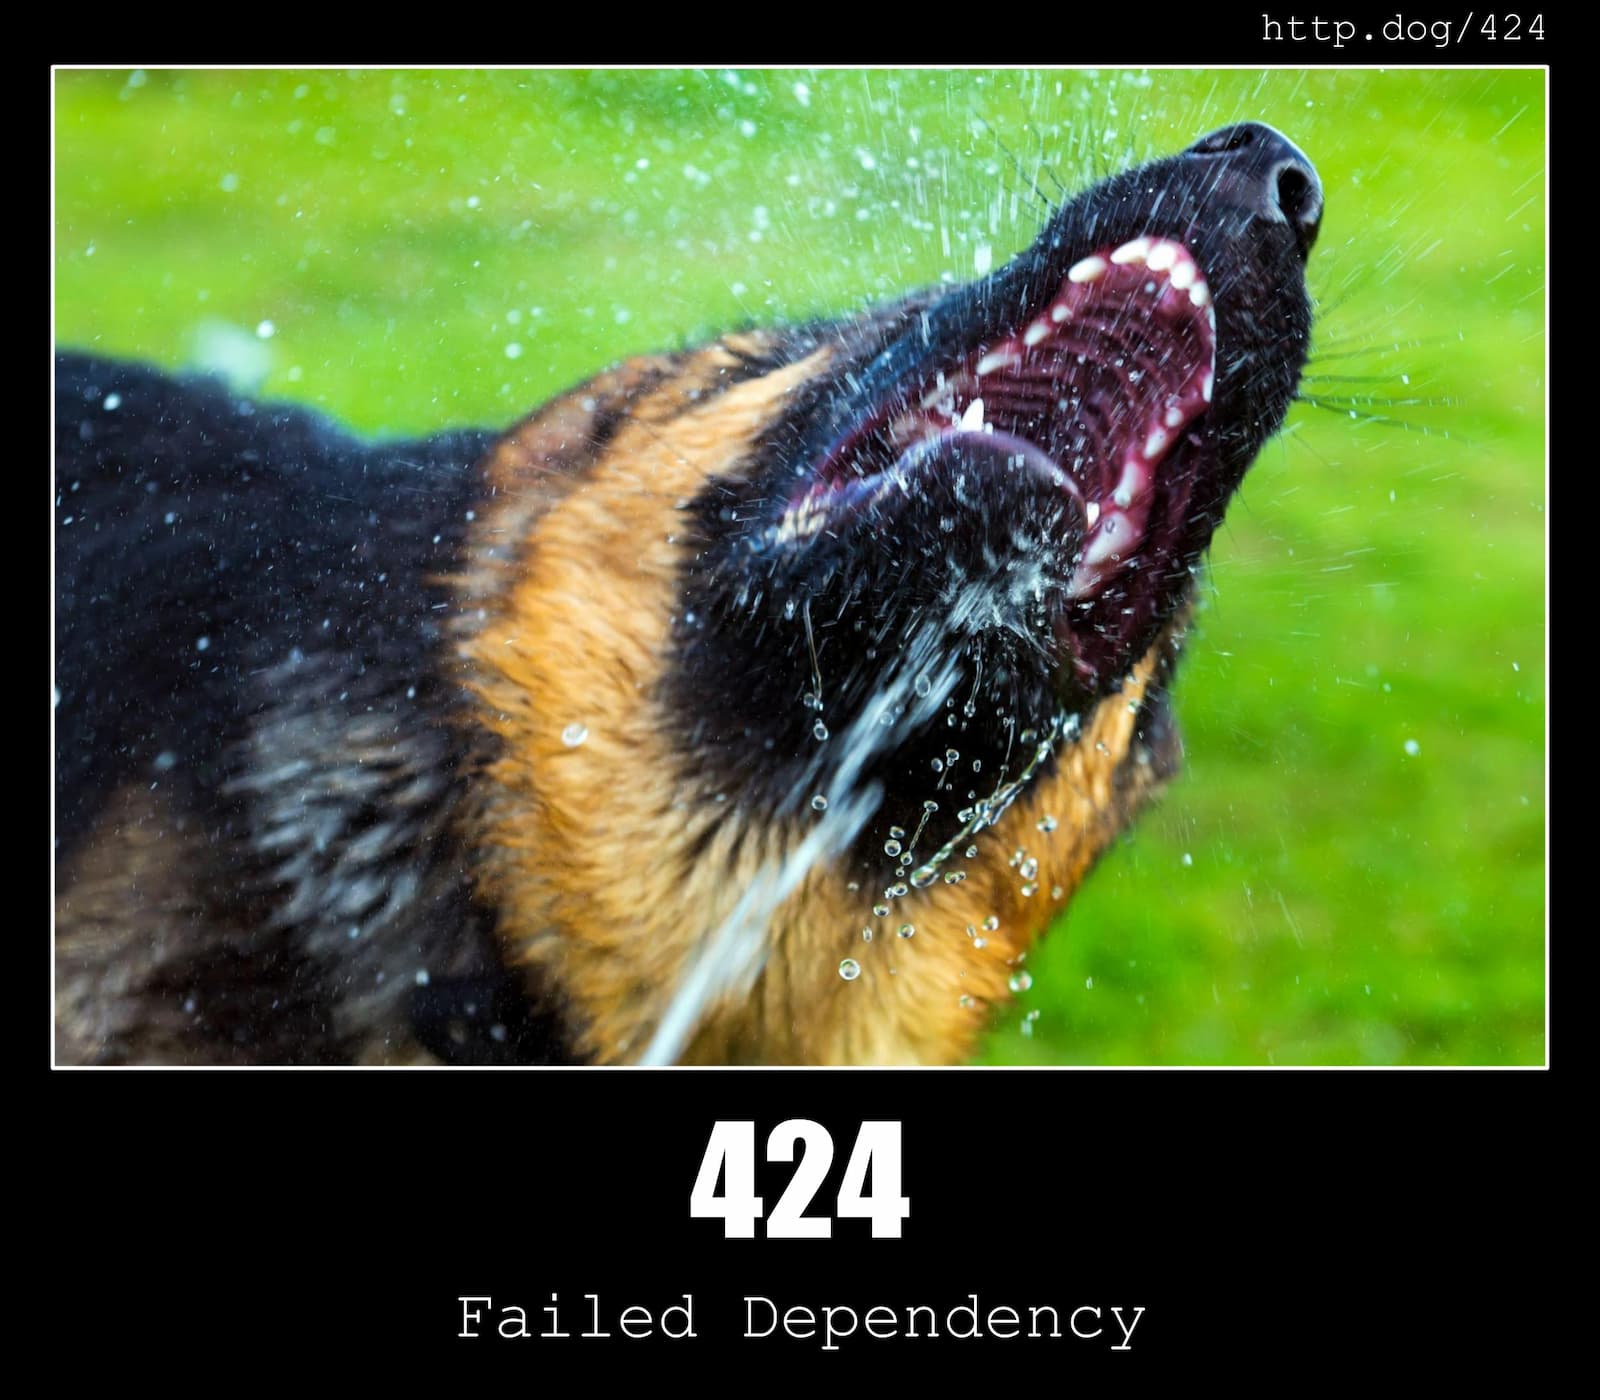 HTTP Status Code 424 Failed Dependency & Dogs